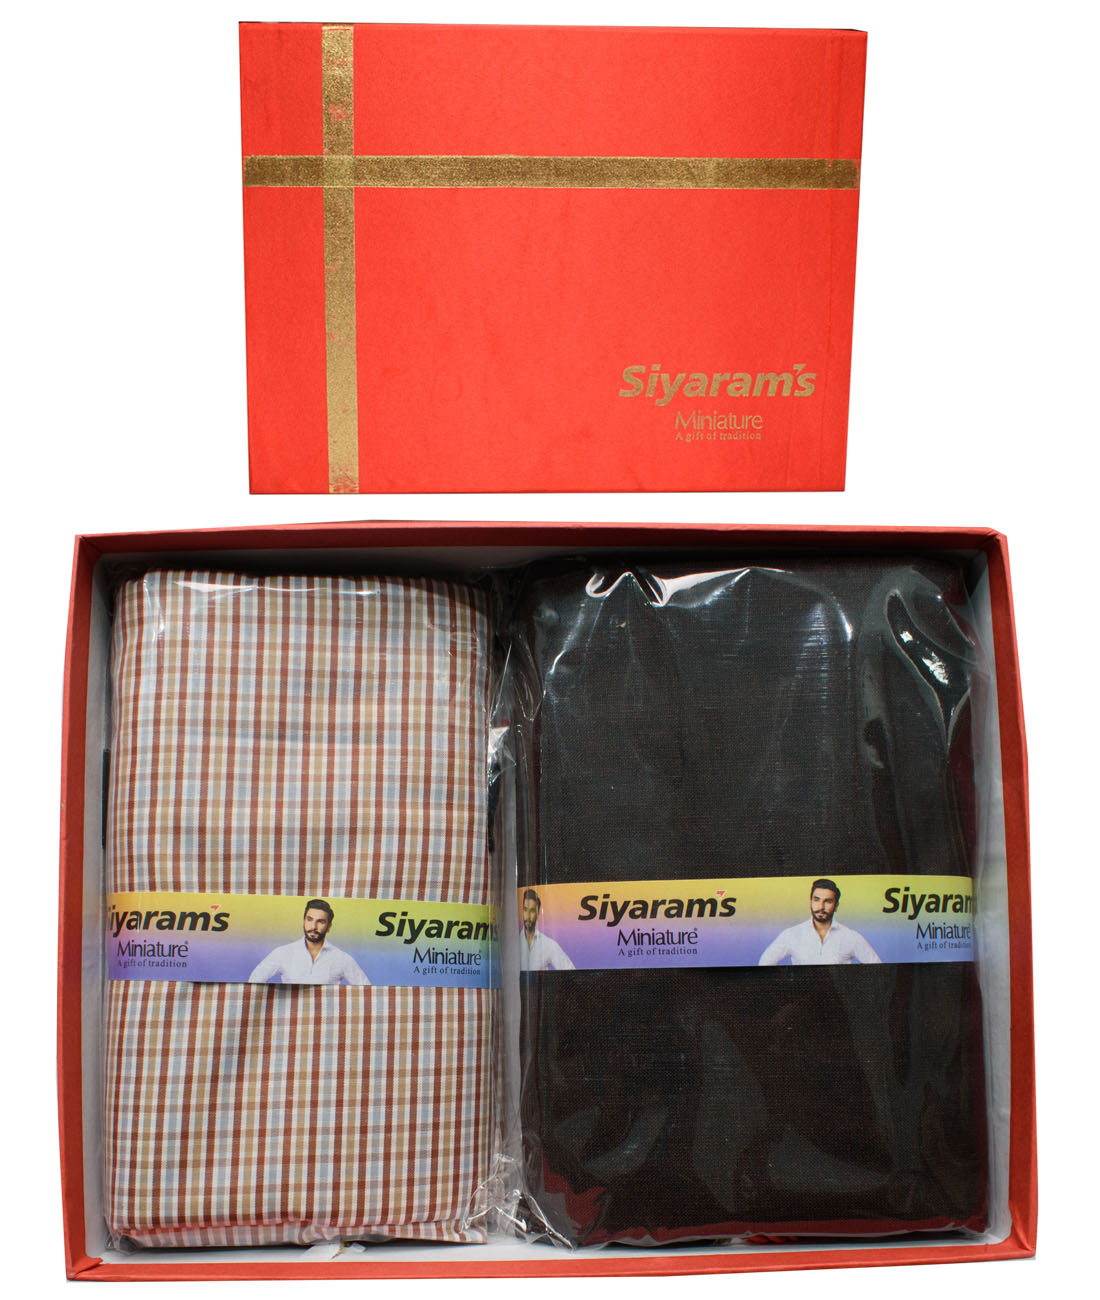 Raymond Fabrics Makers Men's Combo of Unstitched Poly Cotton Shirt and  Trouser Fabric Set - Gift Pac | Raymond fabric, Fabric, Cotton shirt